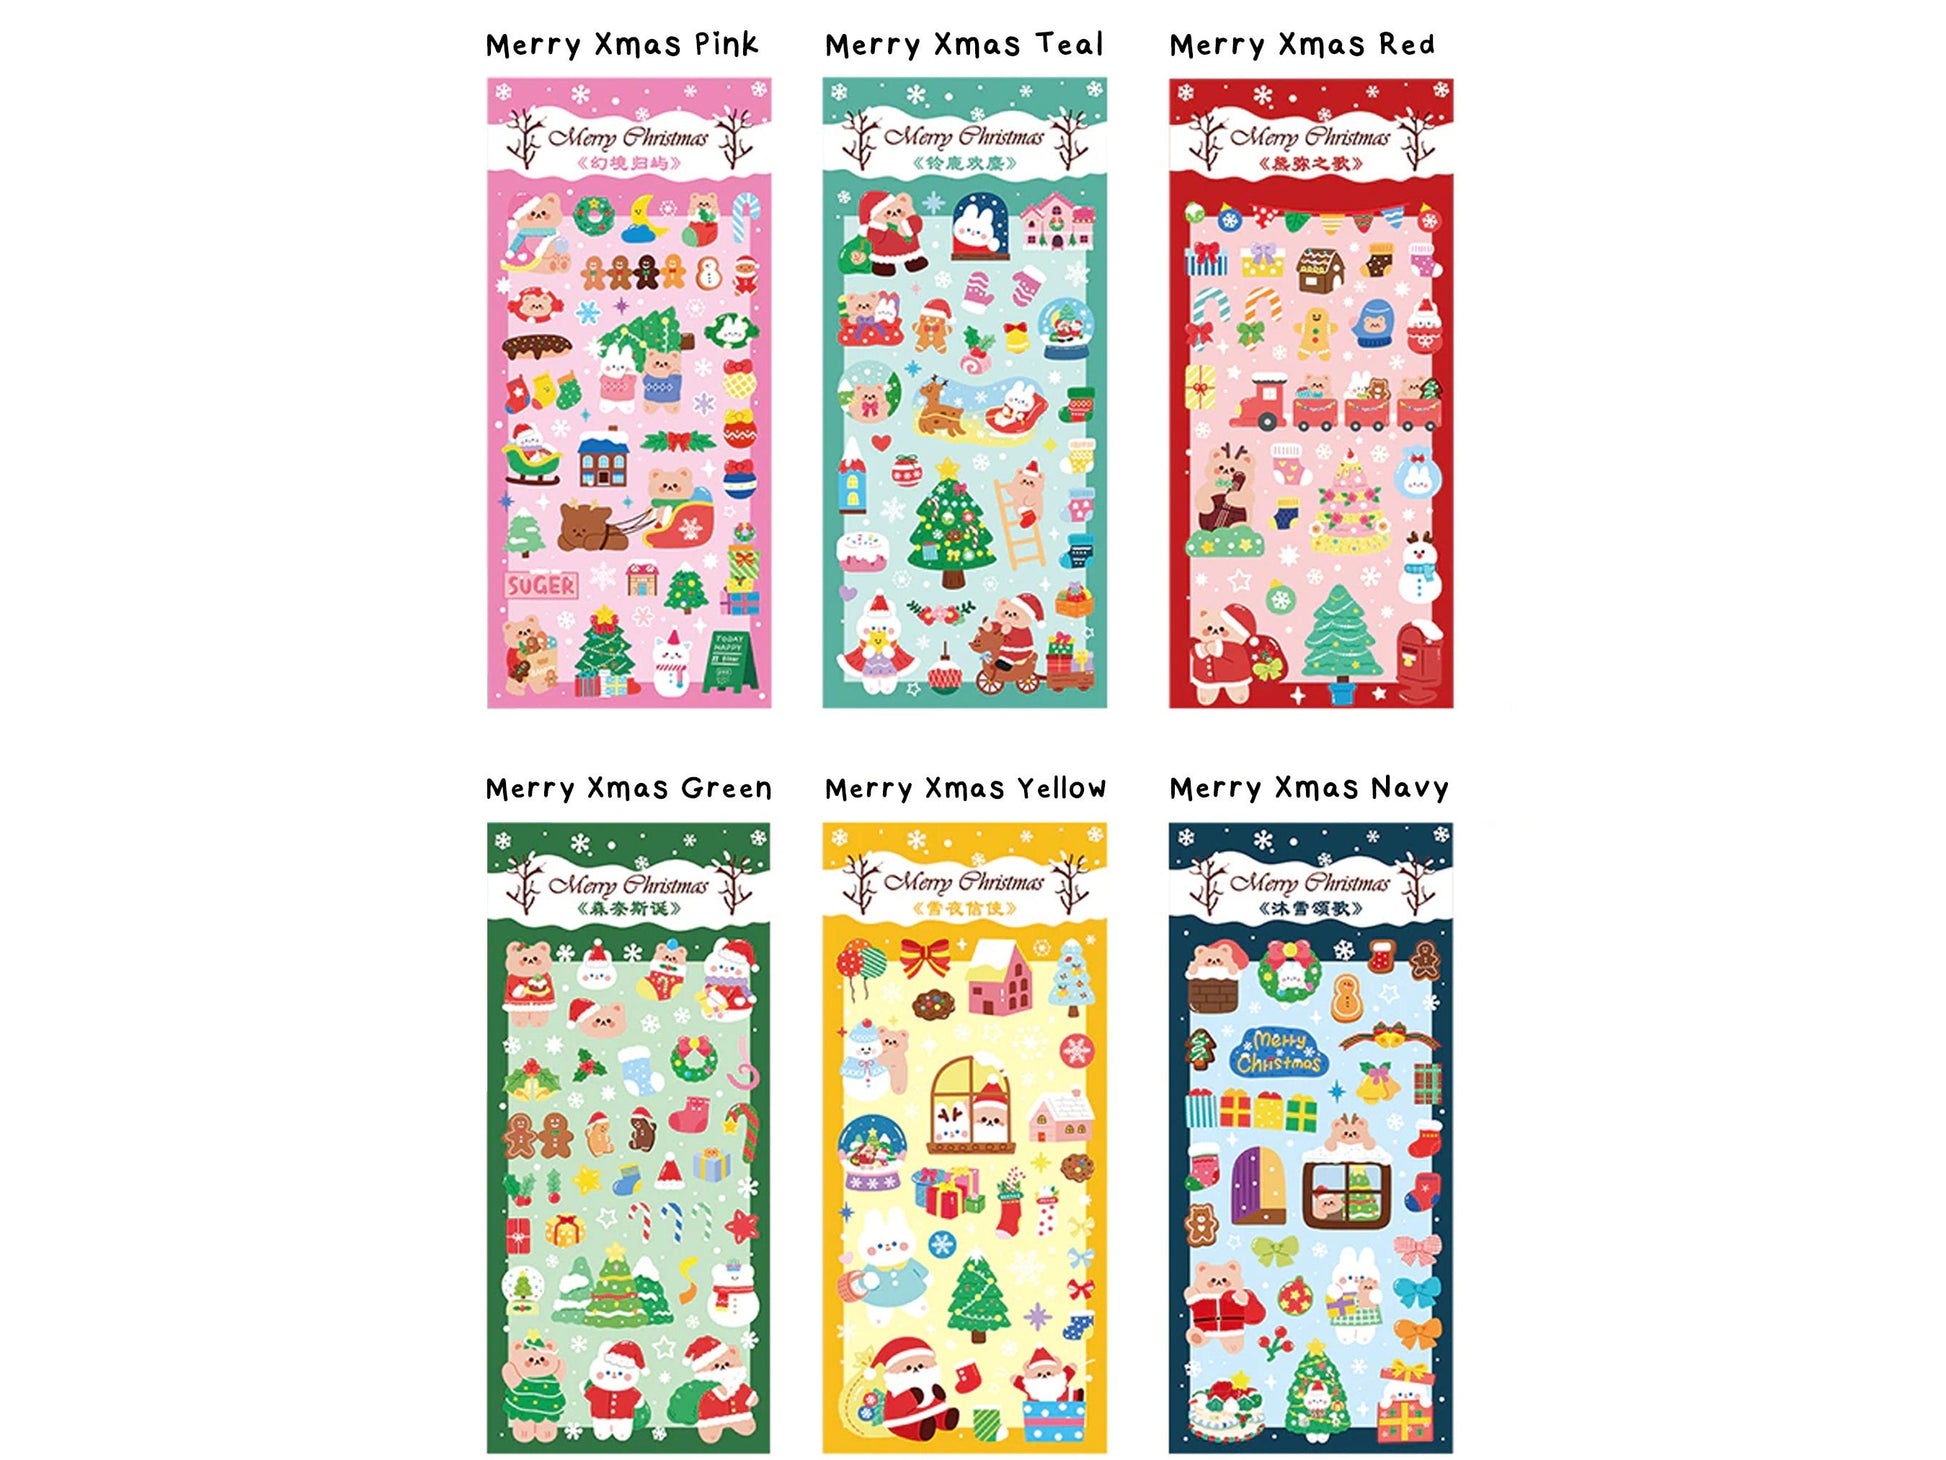 12 Pieces Stickers (girly) - Stickers - at 